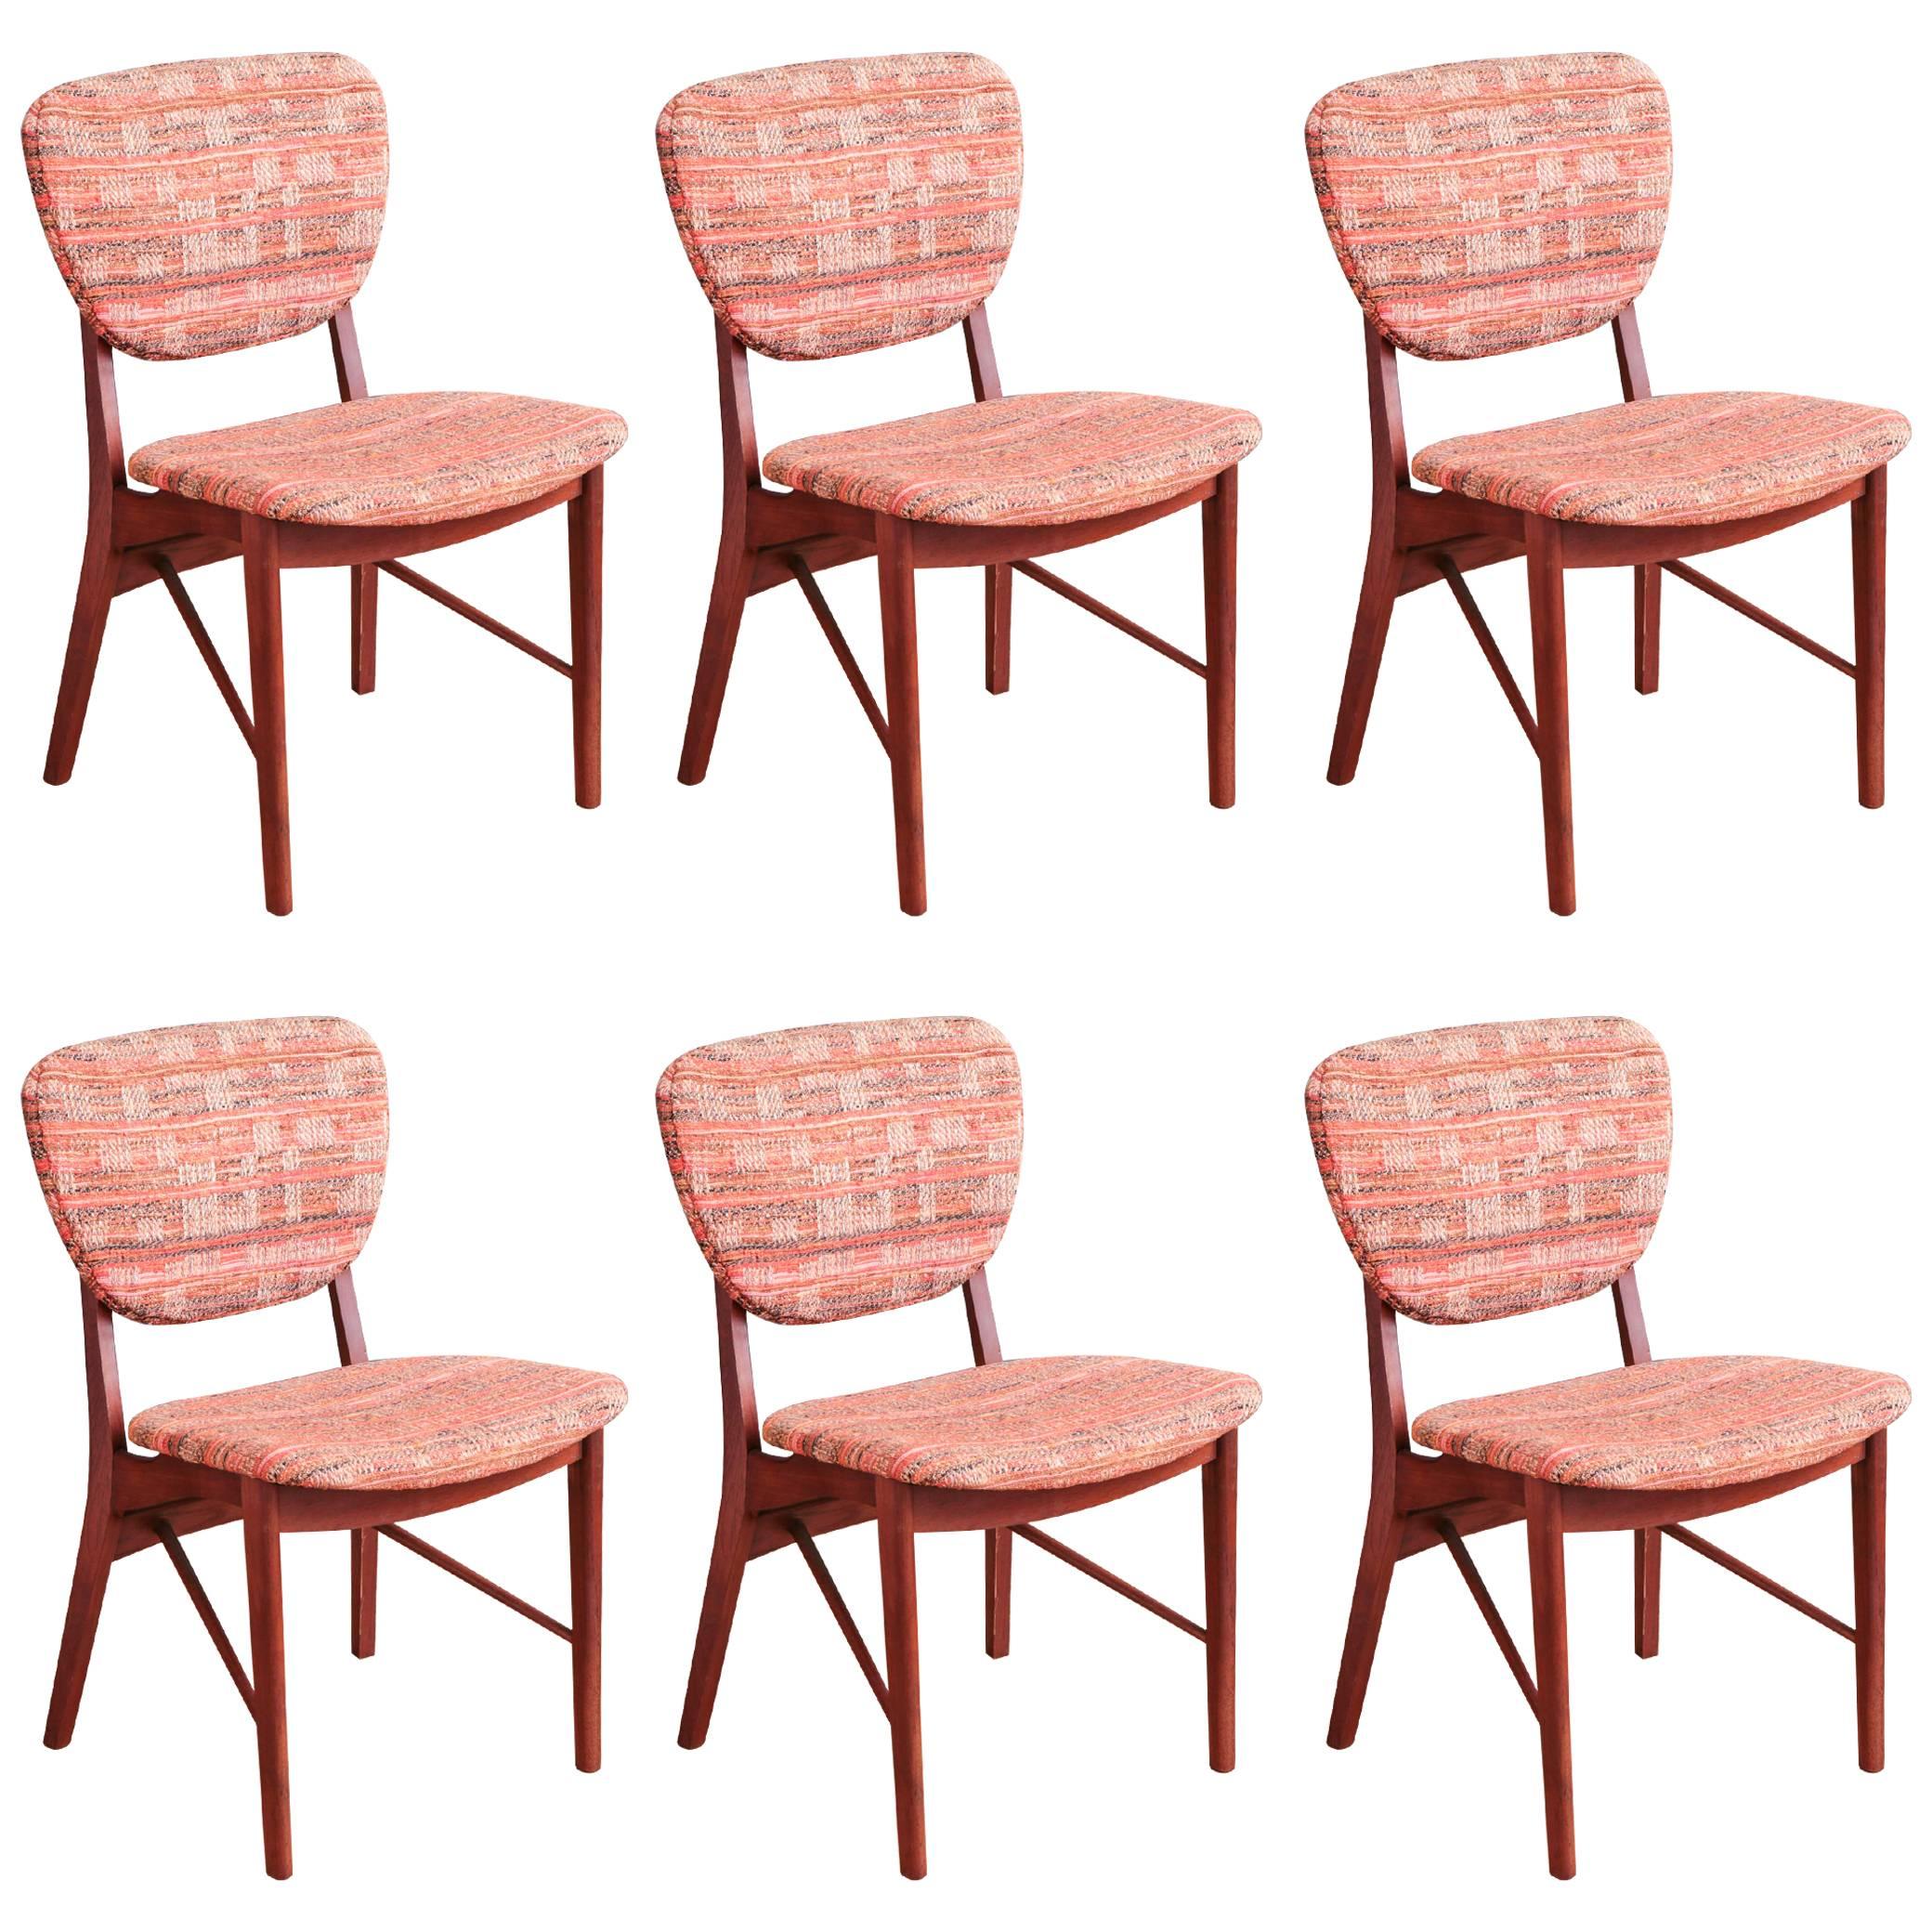 Set of Six Teak Dining Chairs by Niels Vodder